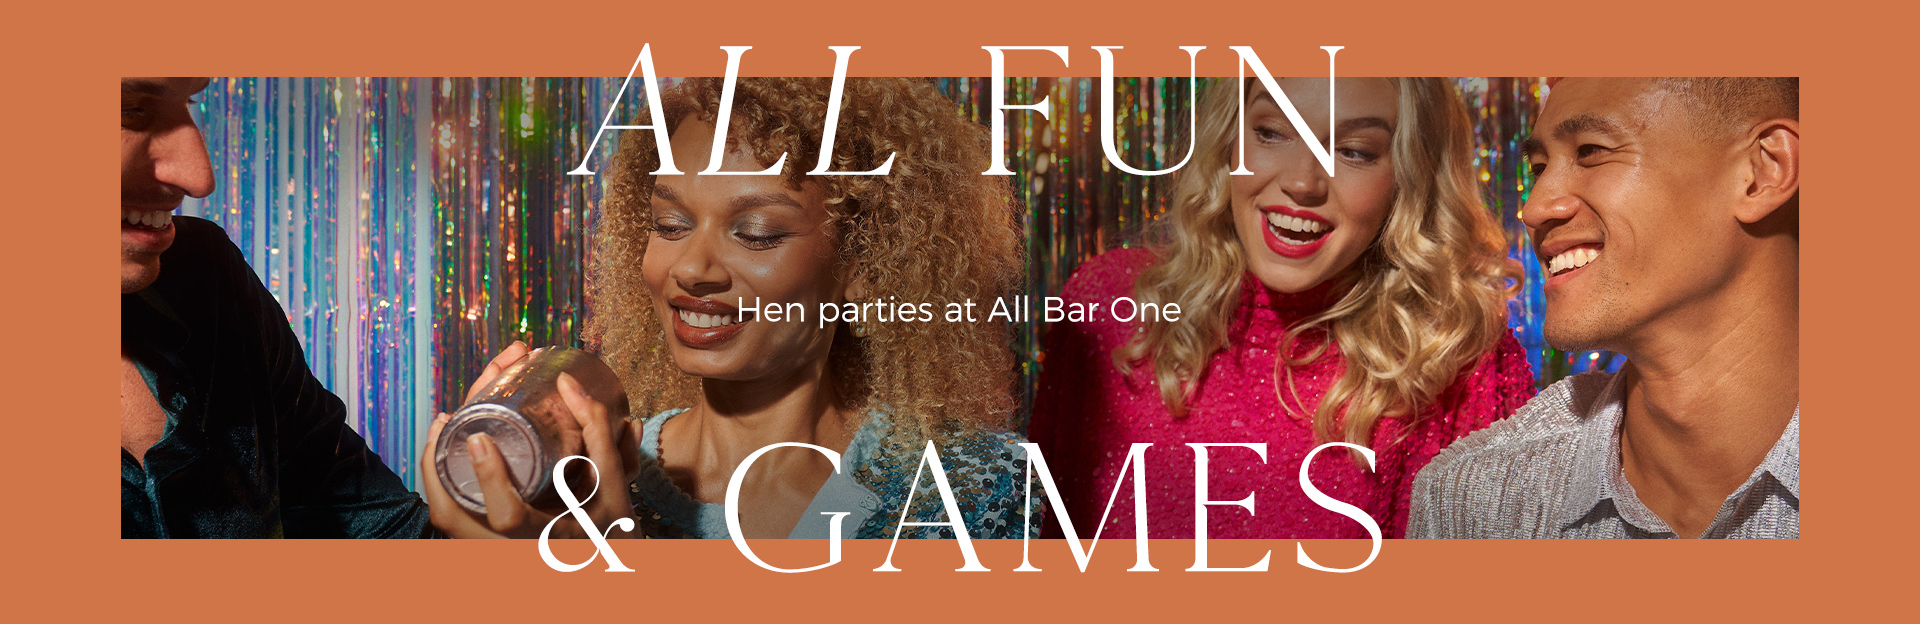 Hen parties at All Bar One Guildford